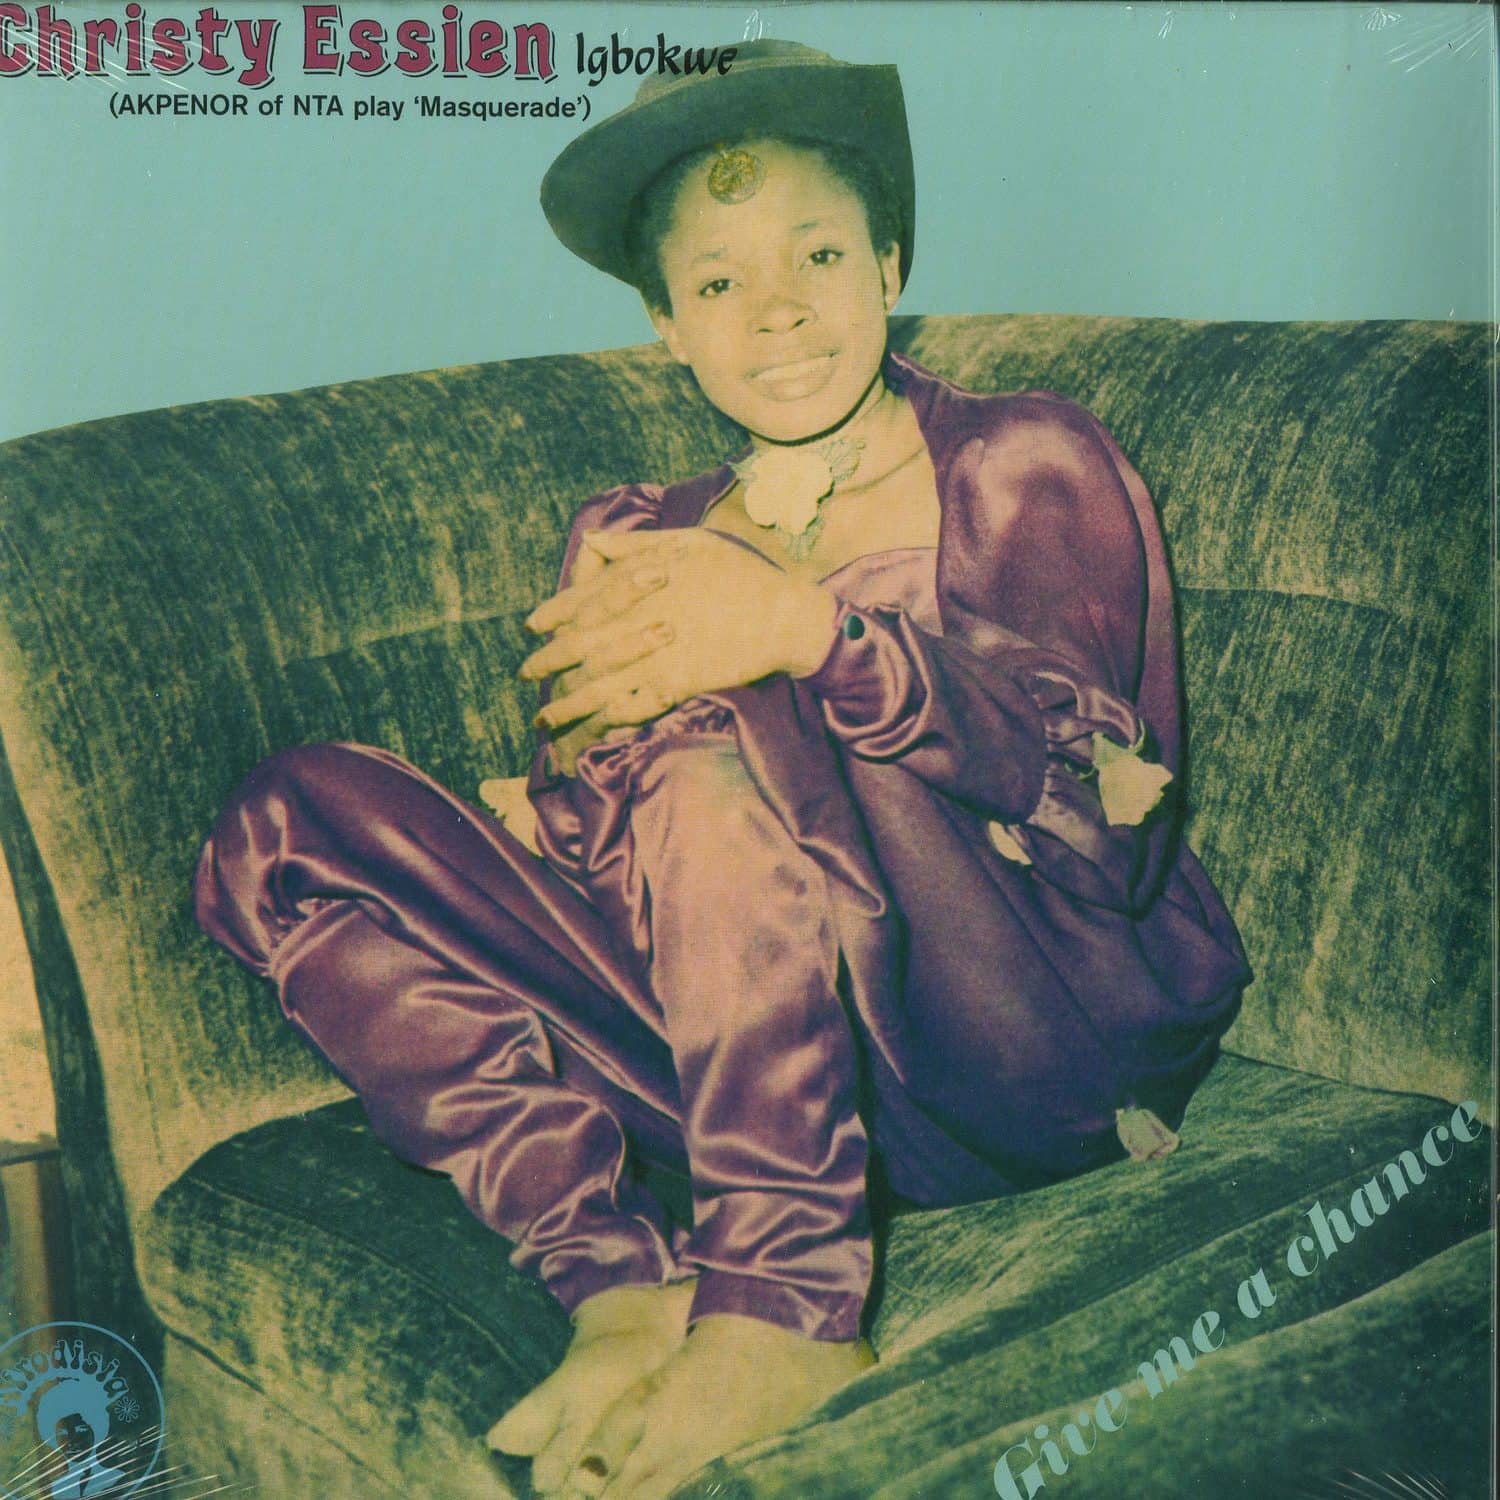 Christy Essien - GIVE ME A CHANCE 